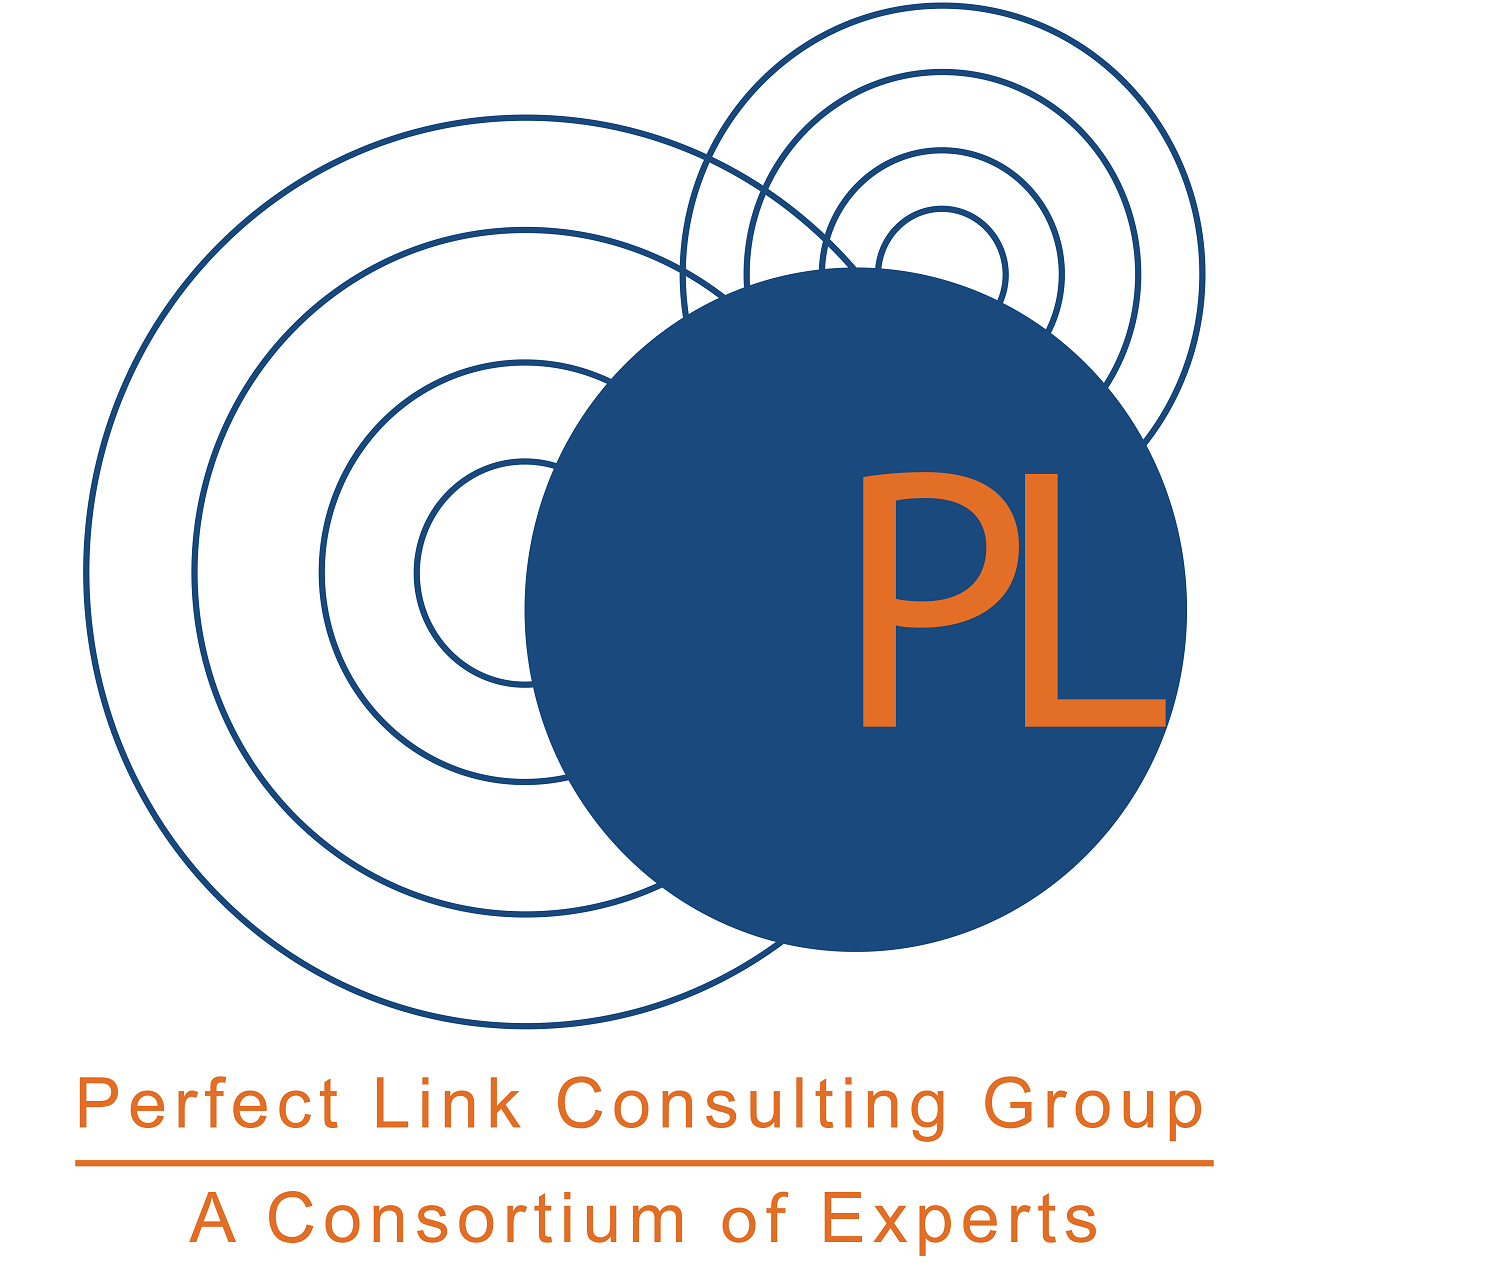 Perfect Link Consulting Group